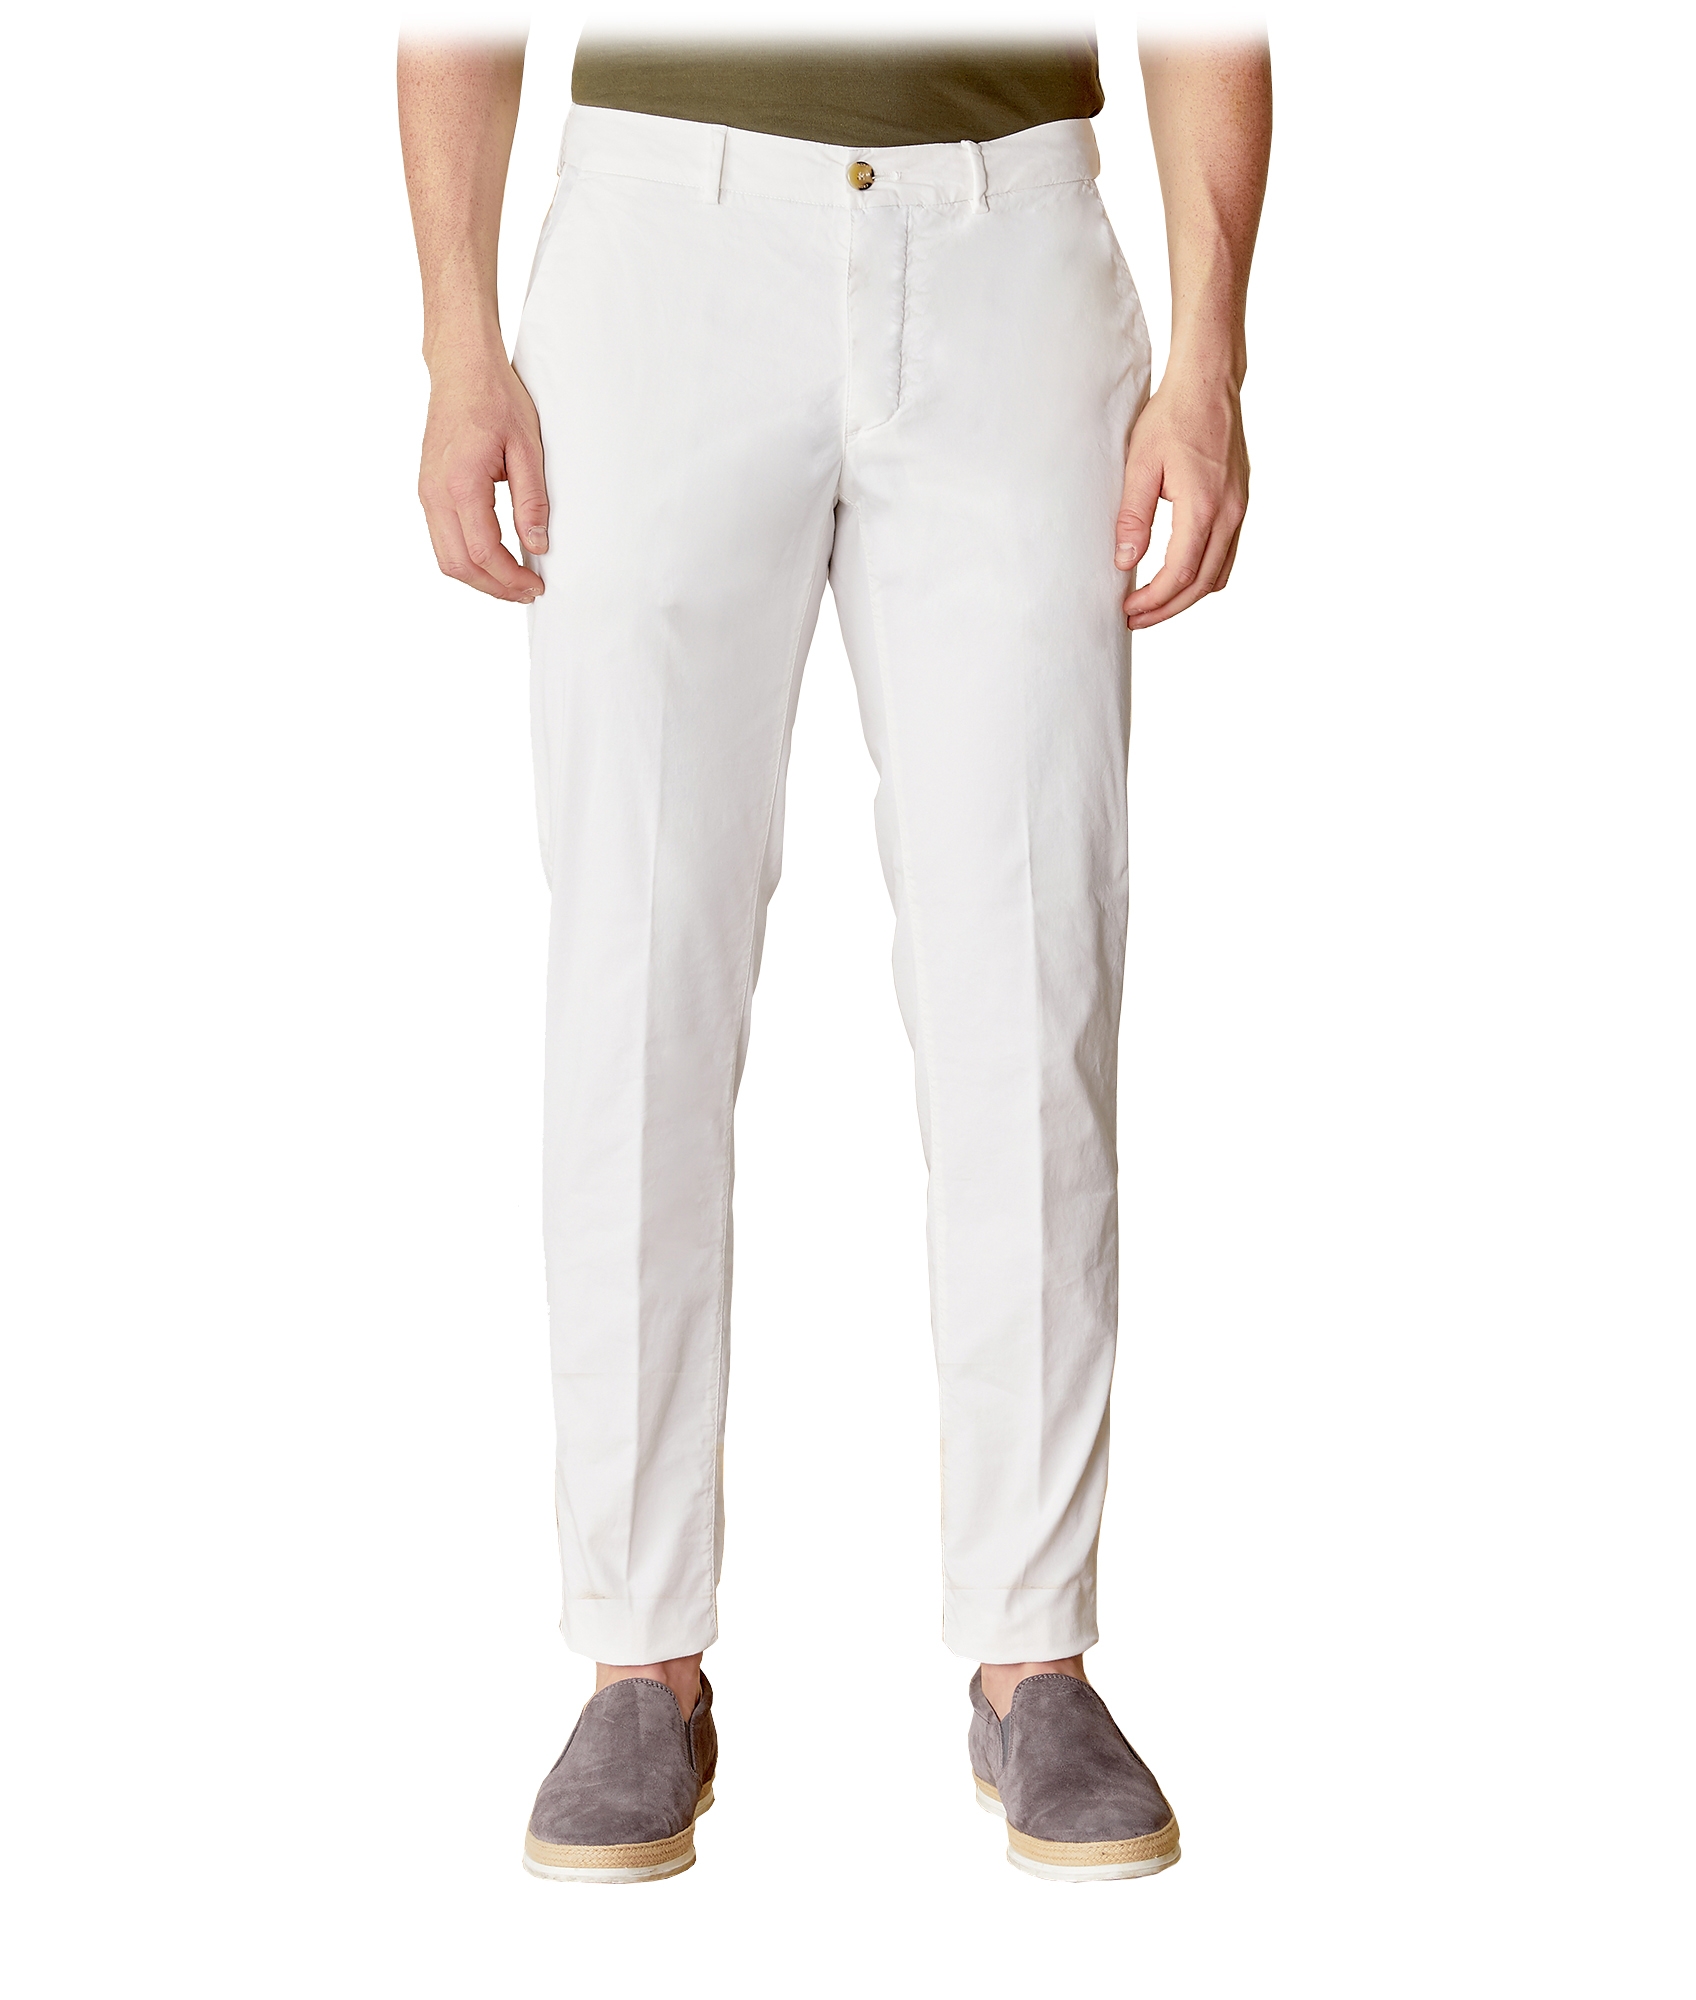 kampagne Ruckus Biprodukt Cruna - New Town Trousers in Cotton - 522 - Off White - Handmade in Italy -  Luxury High Quality Pants - Avvenice